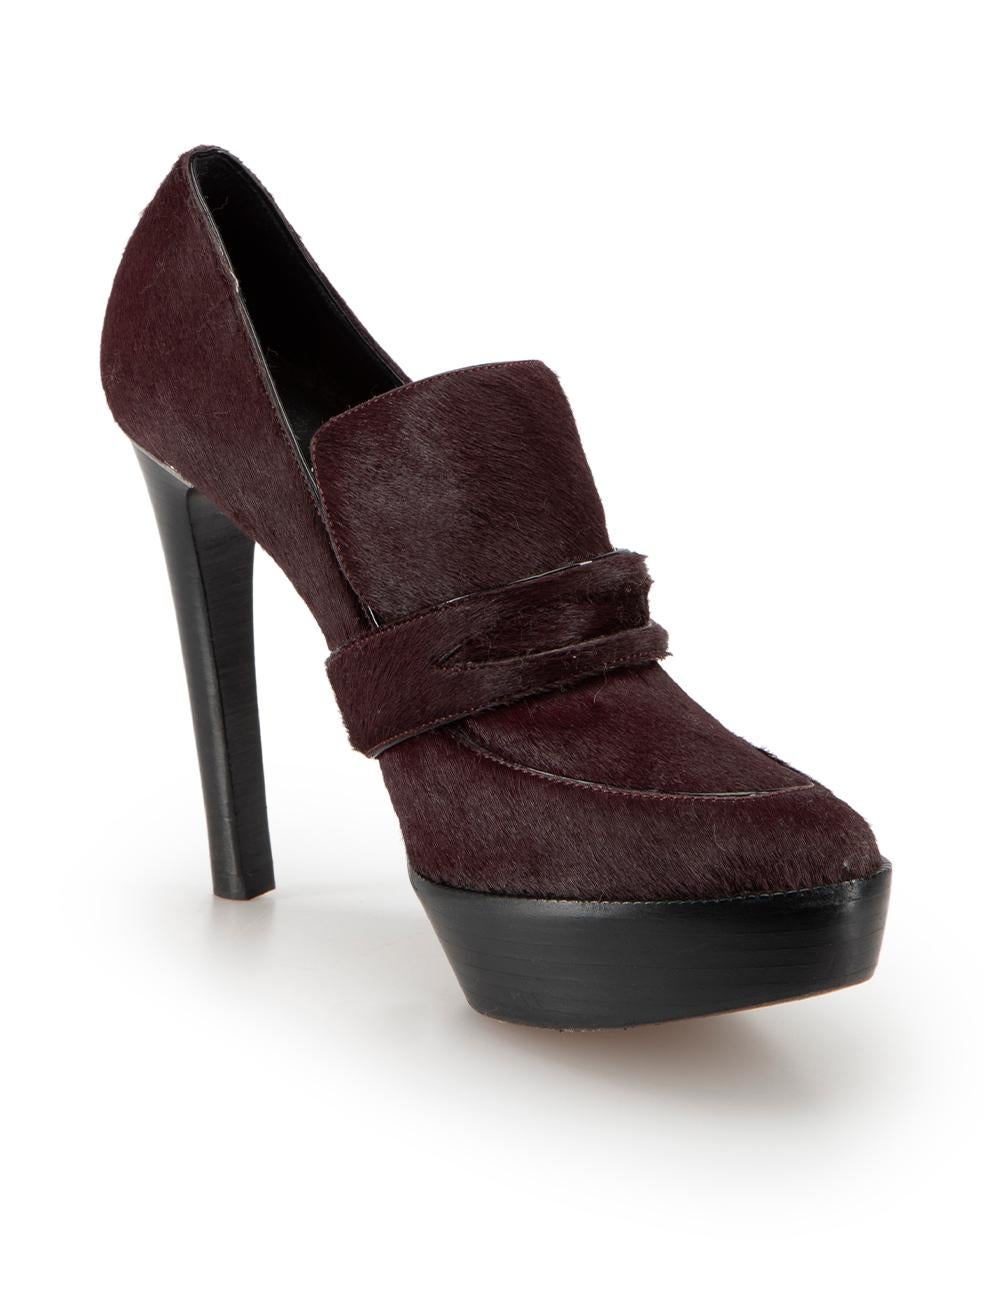 CONDITION is Very good. Minimal wear to shoes is evident. Minimal wear to both platforms and the left shoe heel-stem with scuffs on this used Burberry designer resale item. These shoes come with original box and dust bag.



Details


Burgundy

Pony